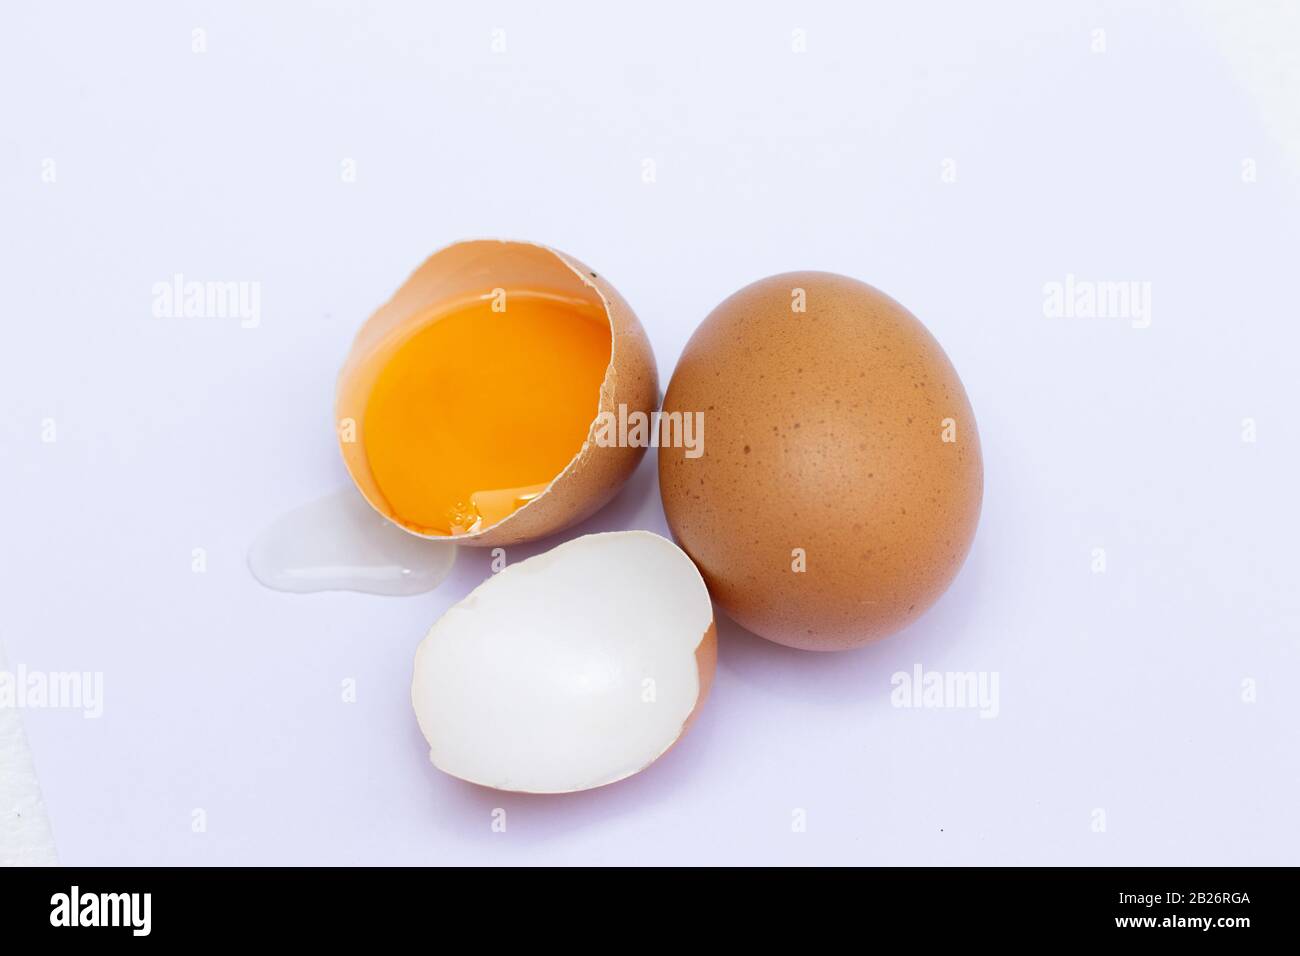 Two brown eggs There was one egg broken in half, with a yolk inside the eggshell and the egg whites flowing on a white background. Stock Photo